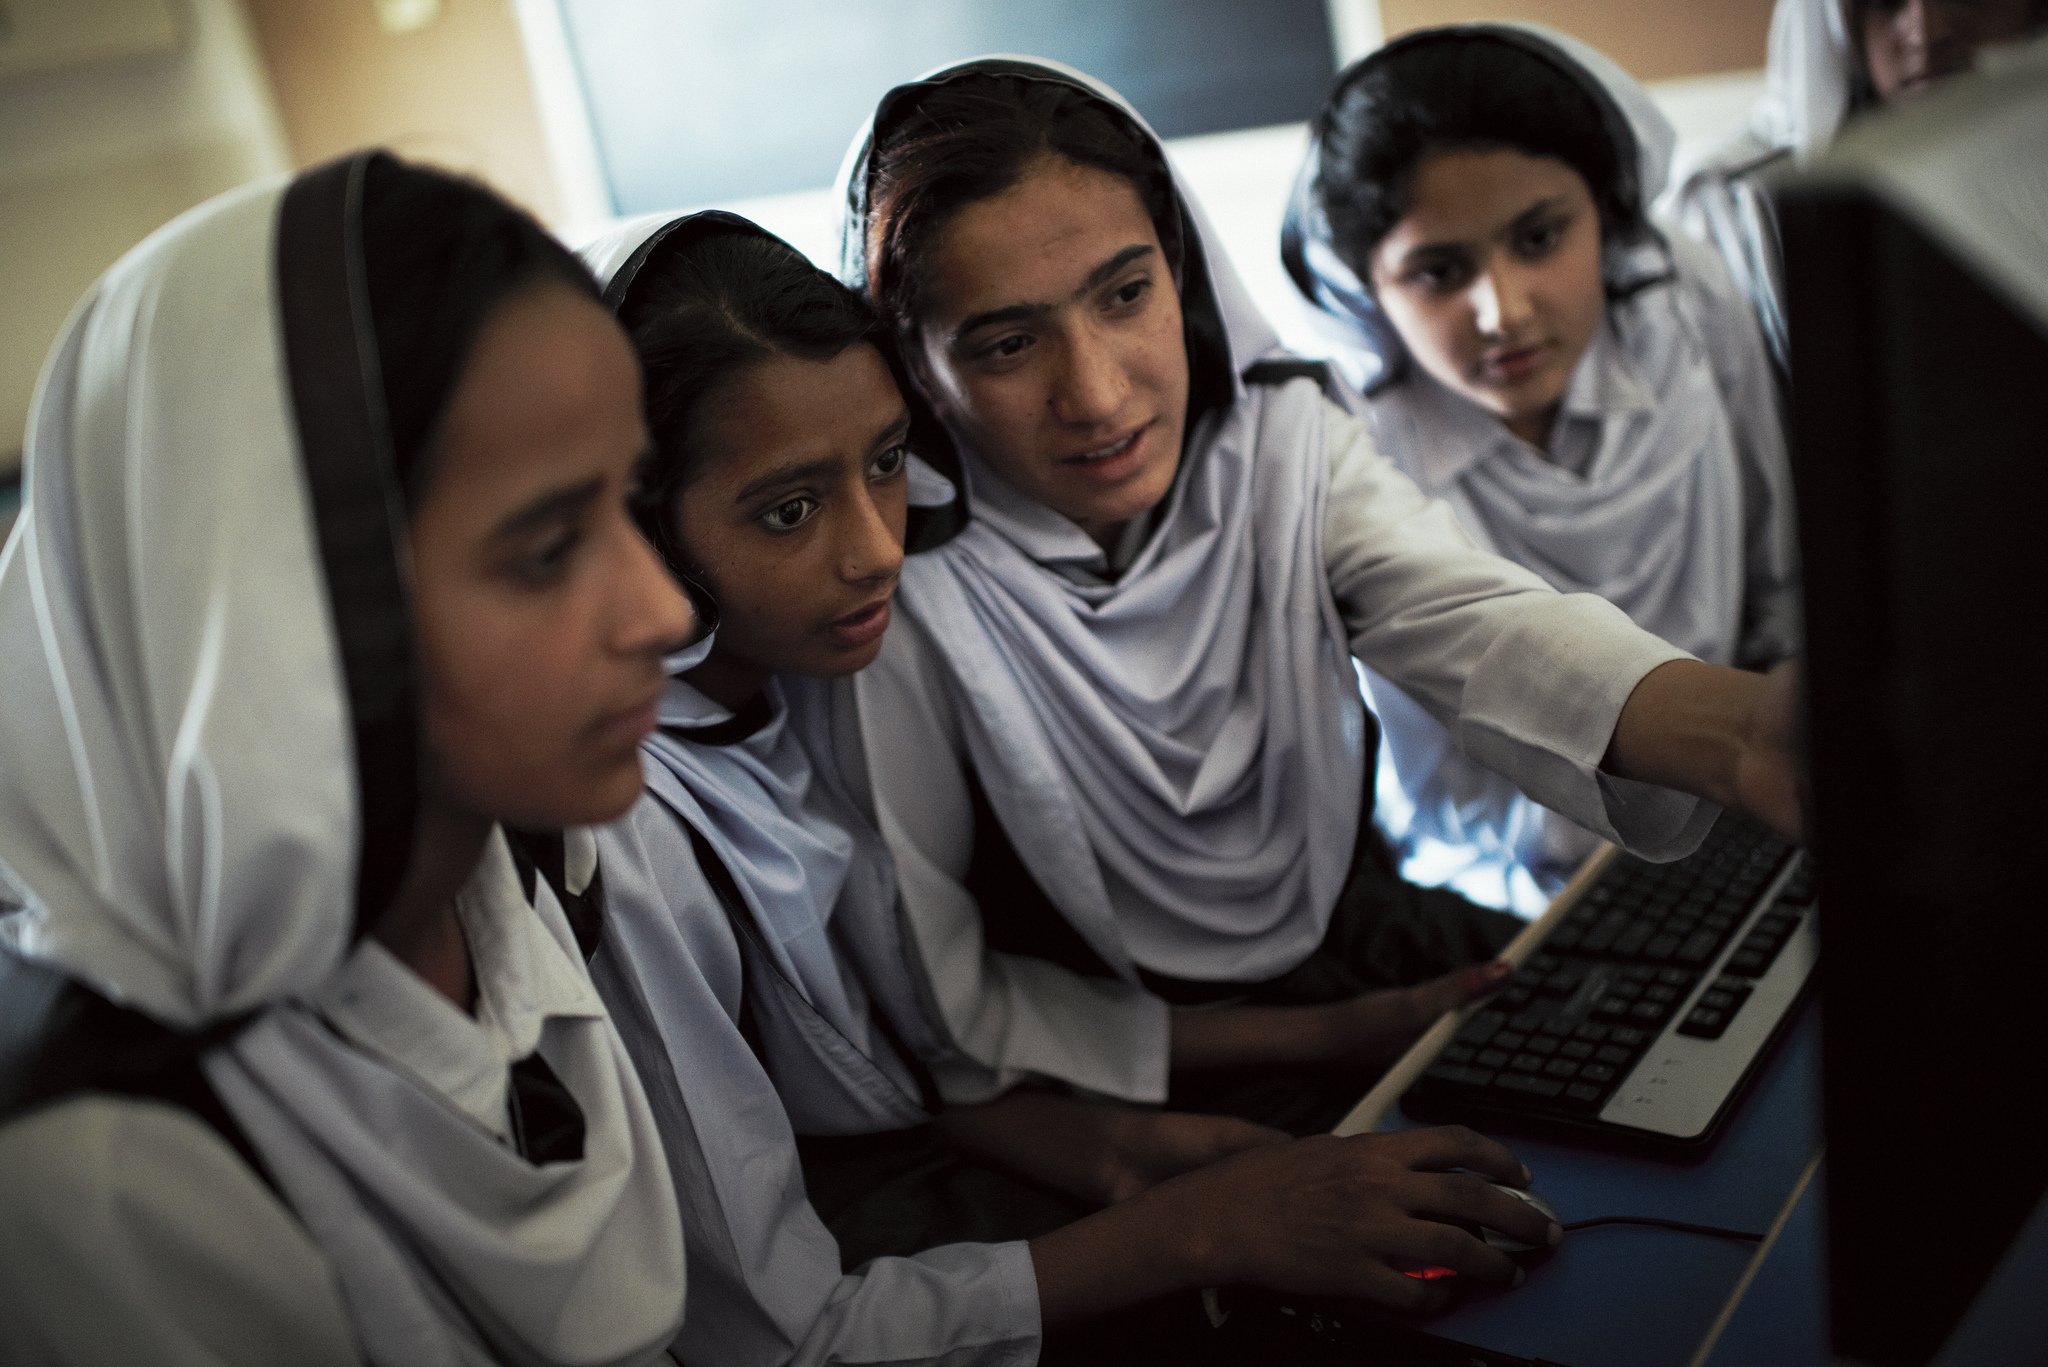 ICT and Gender Equality